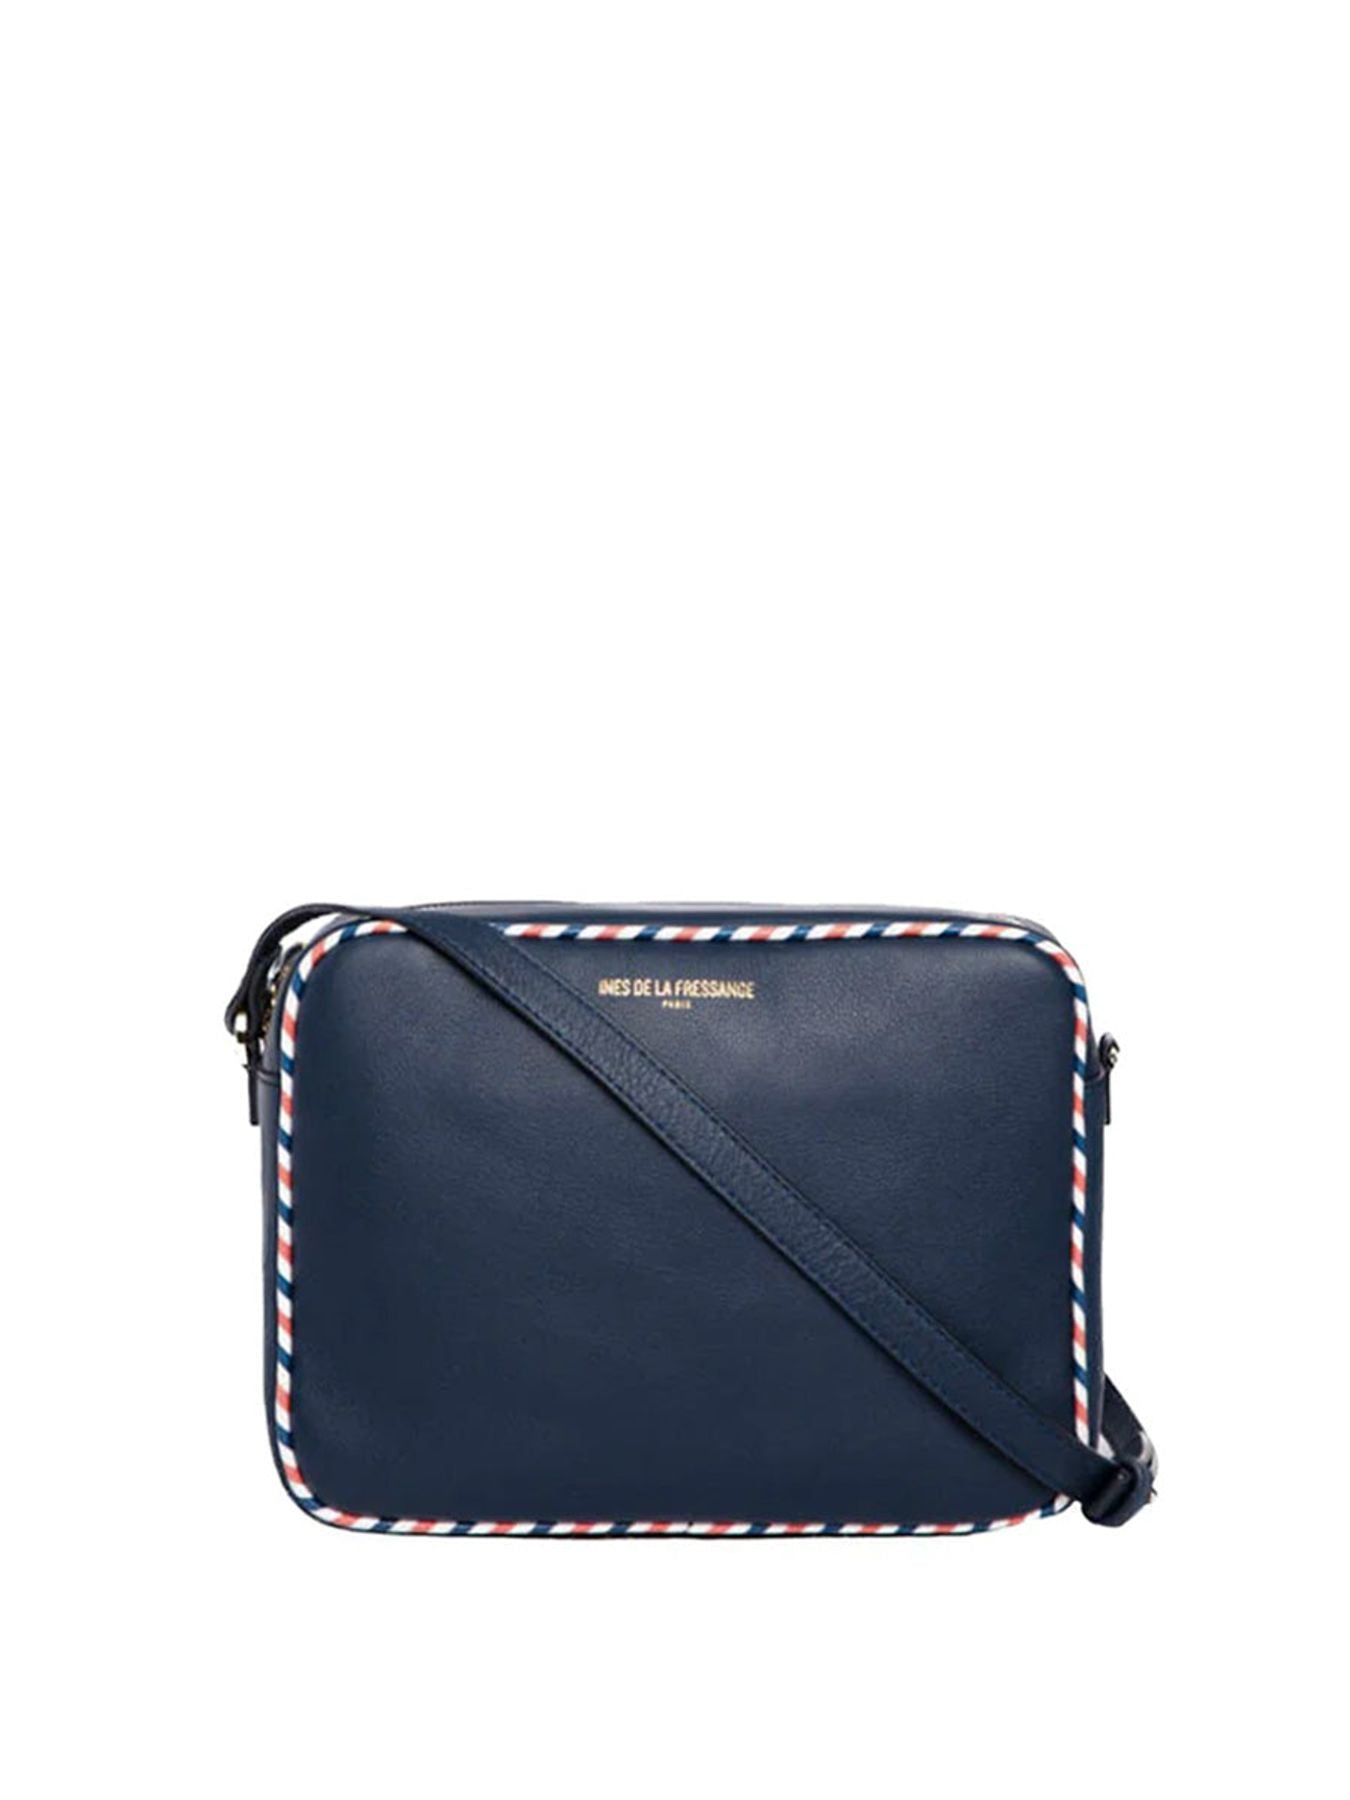 bag-marcia-in-leather-navy-blue